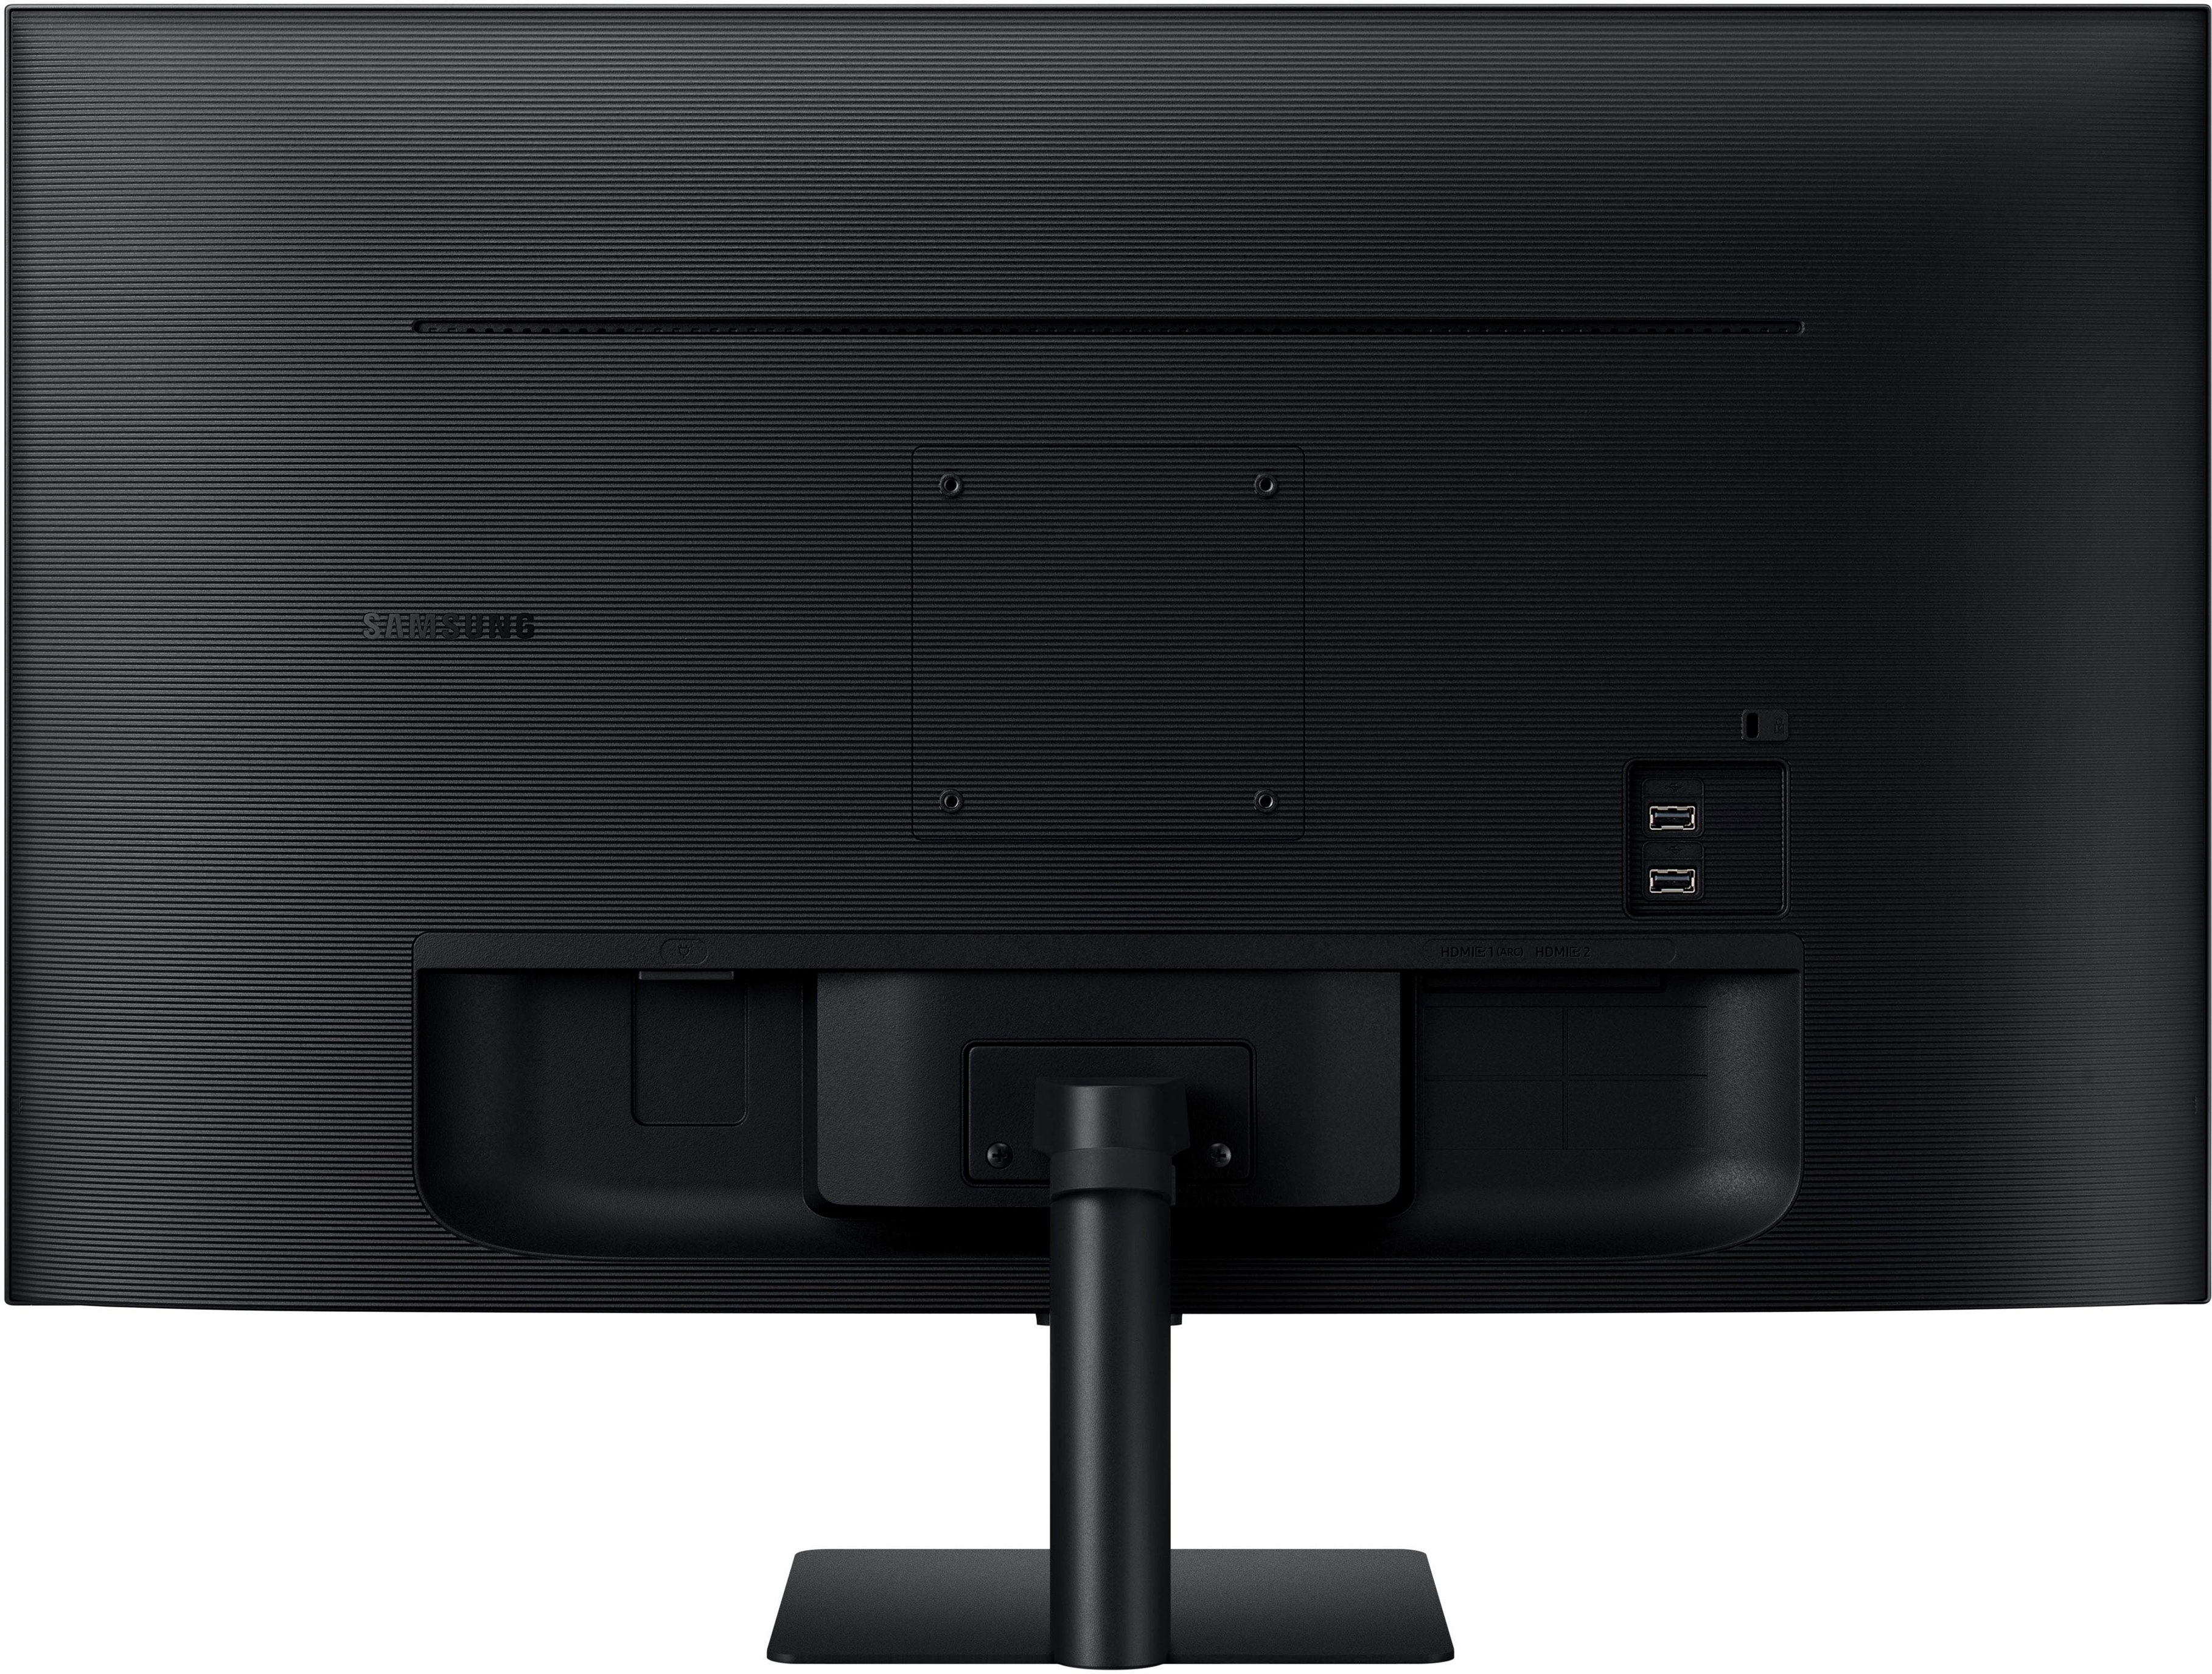 Samsung's Smart Monitor tries too hard to be clever • The Register